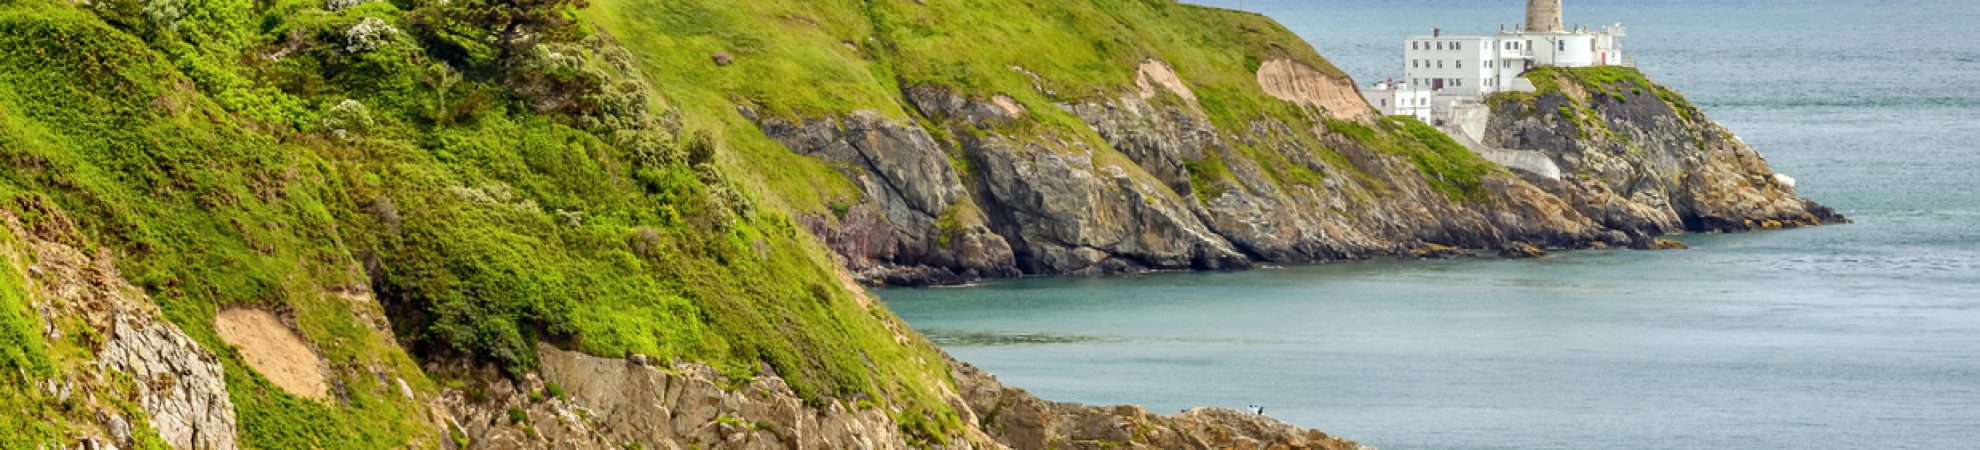 Best irish hike for beginners Bailey Lighthouse, Howth